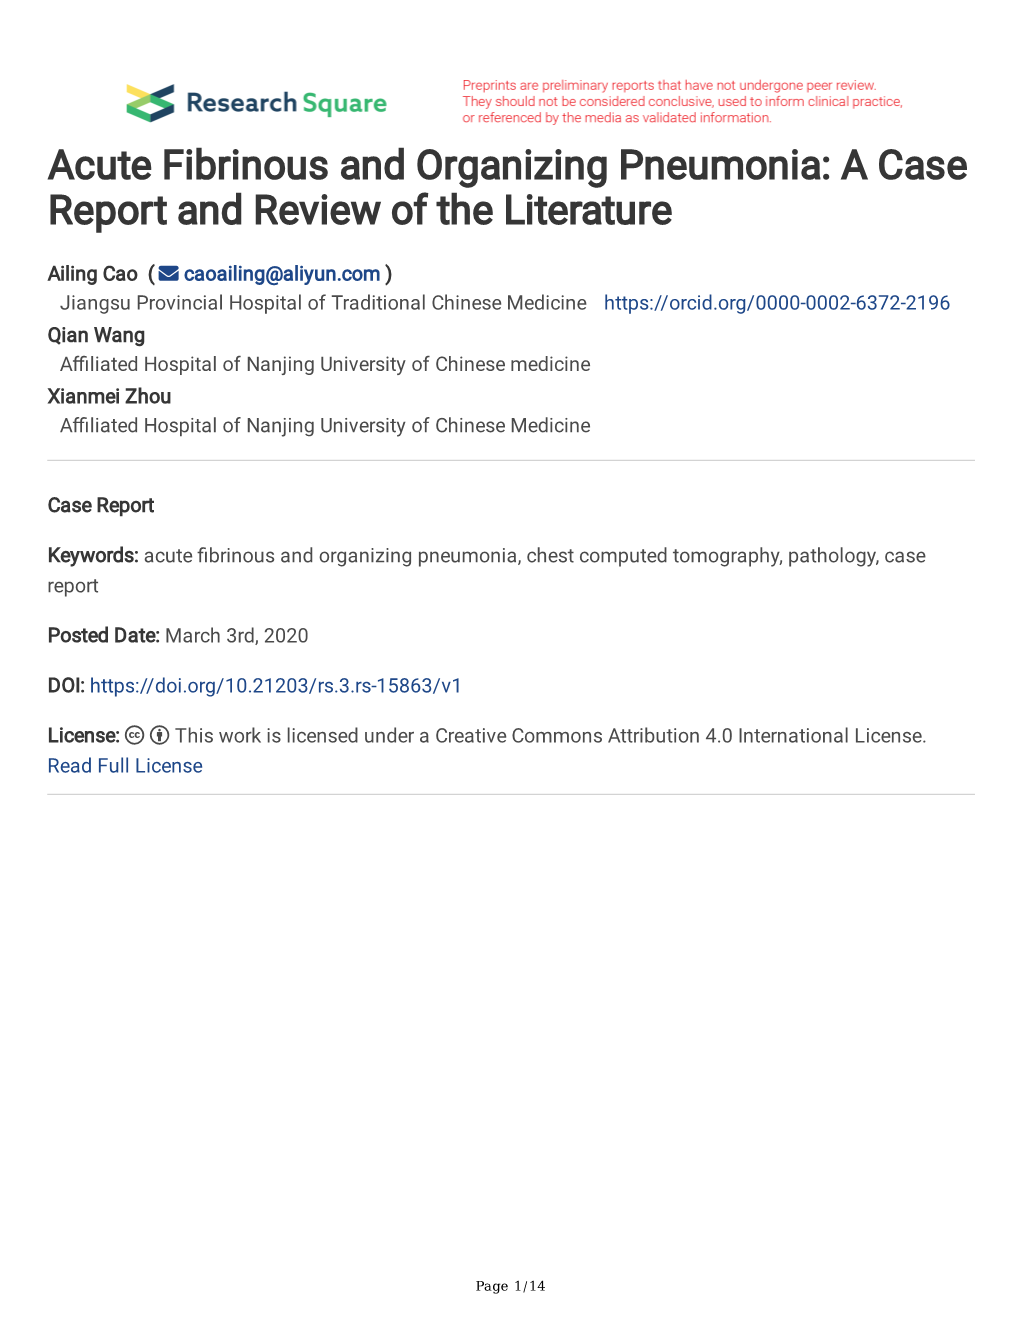 Acute Fibrinous and Organizing Pneumonia: a Case Report and Review of the Literature